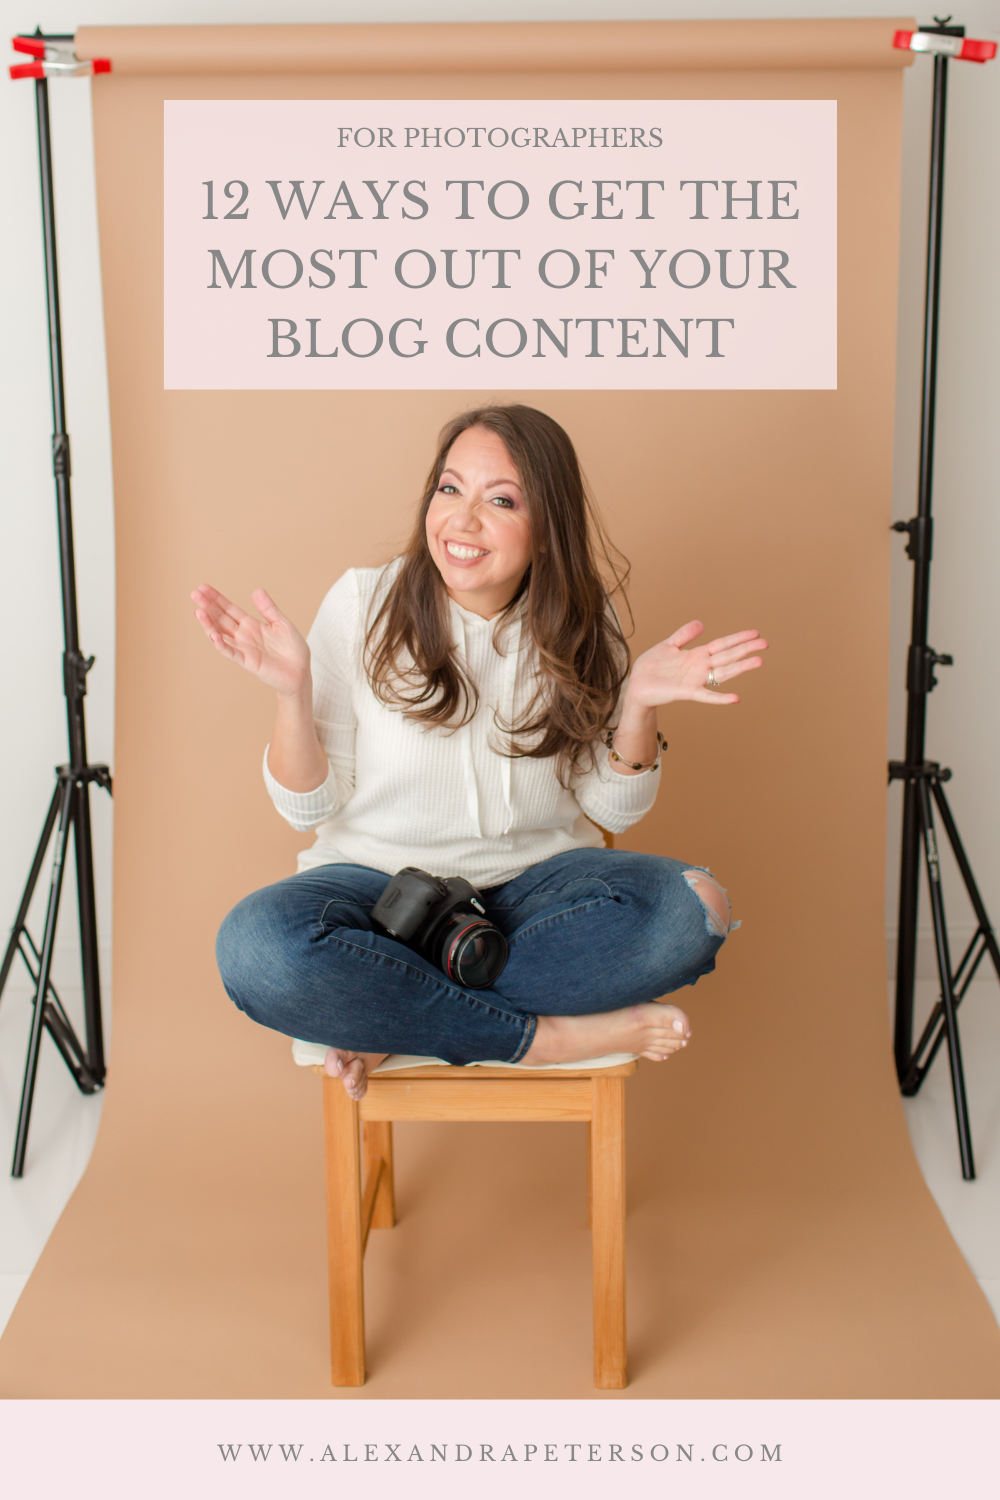 12 Ways to Get the Most Out of Your Blog Content